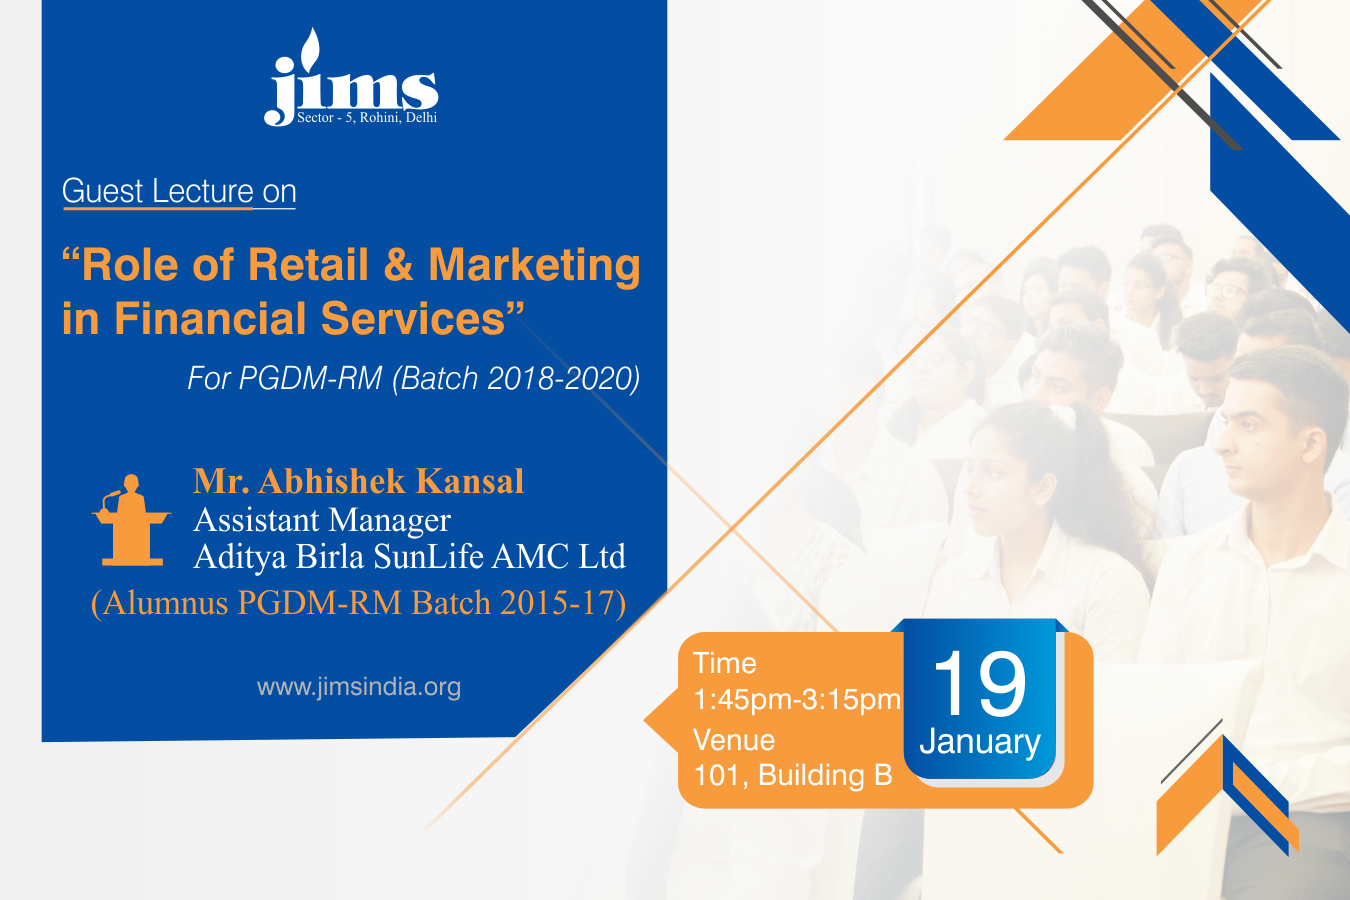 JIMS Rohini organising organizing Guest Lecture on Role of Retail & Marketing in Financial Services